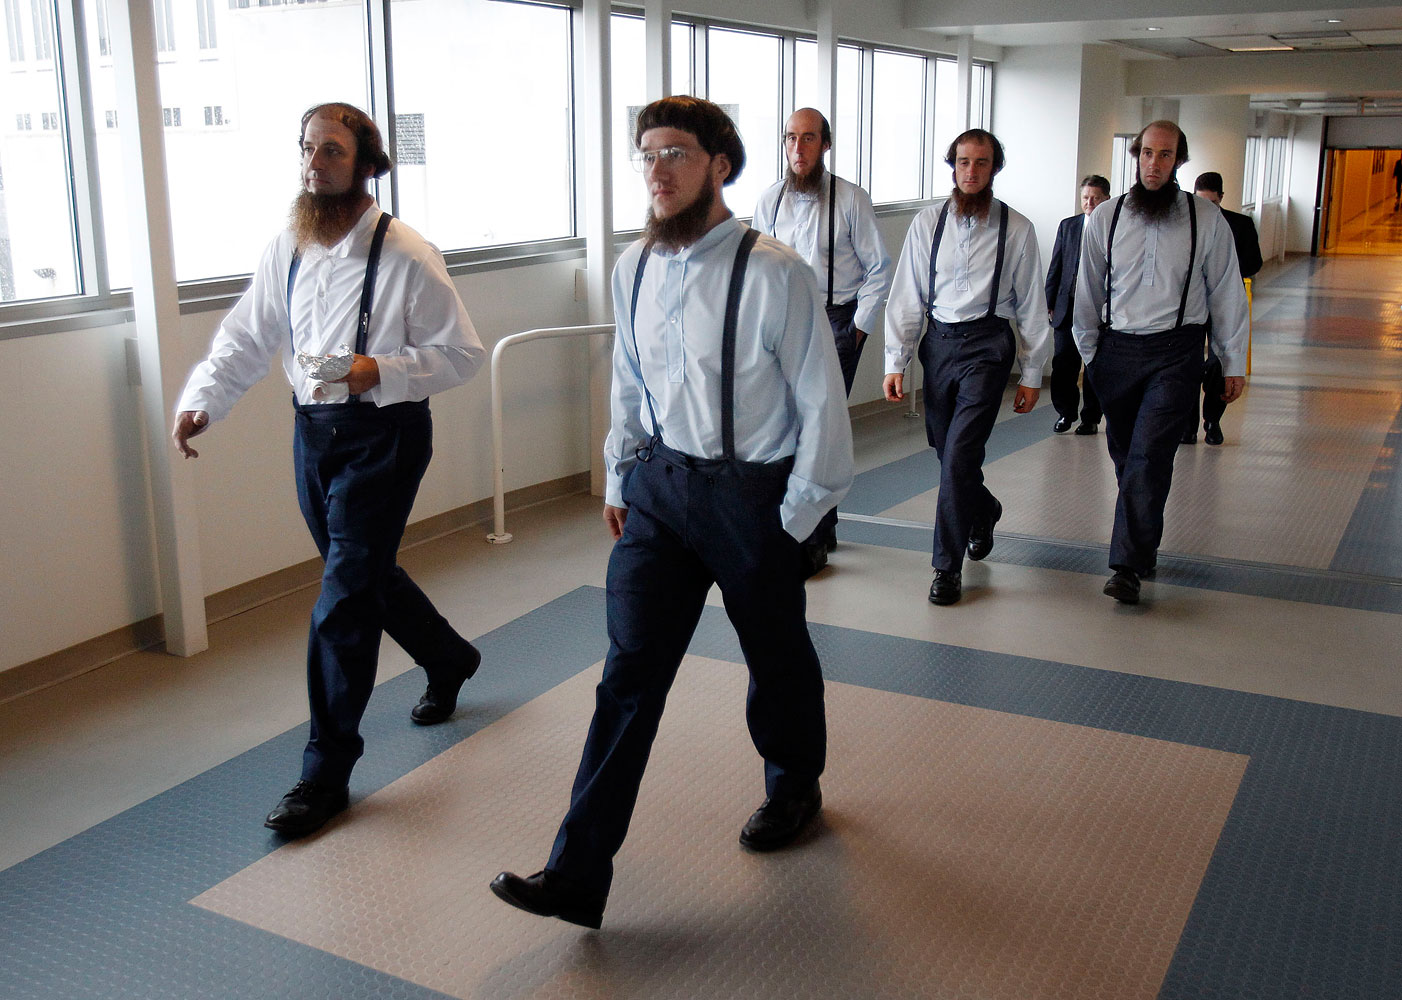 Members of the Amish community leave the Cleveland, Ohio federal courthouse during the trial of a breakaway Amish community in eastern Ohio, led by Samuel Mullet Sr., at the federal courthouse in Cleveland, Aug. 27, 2012. (David Maxwell—EPA)